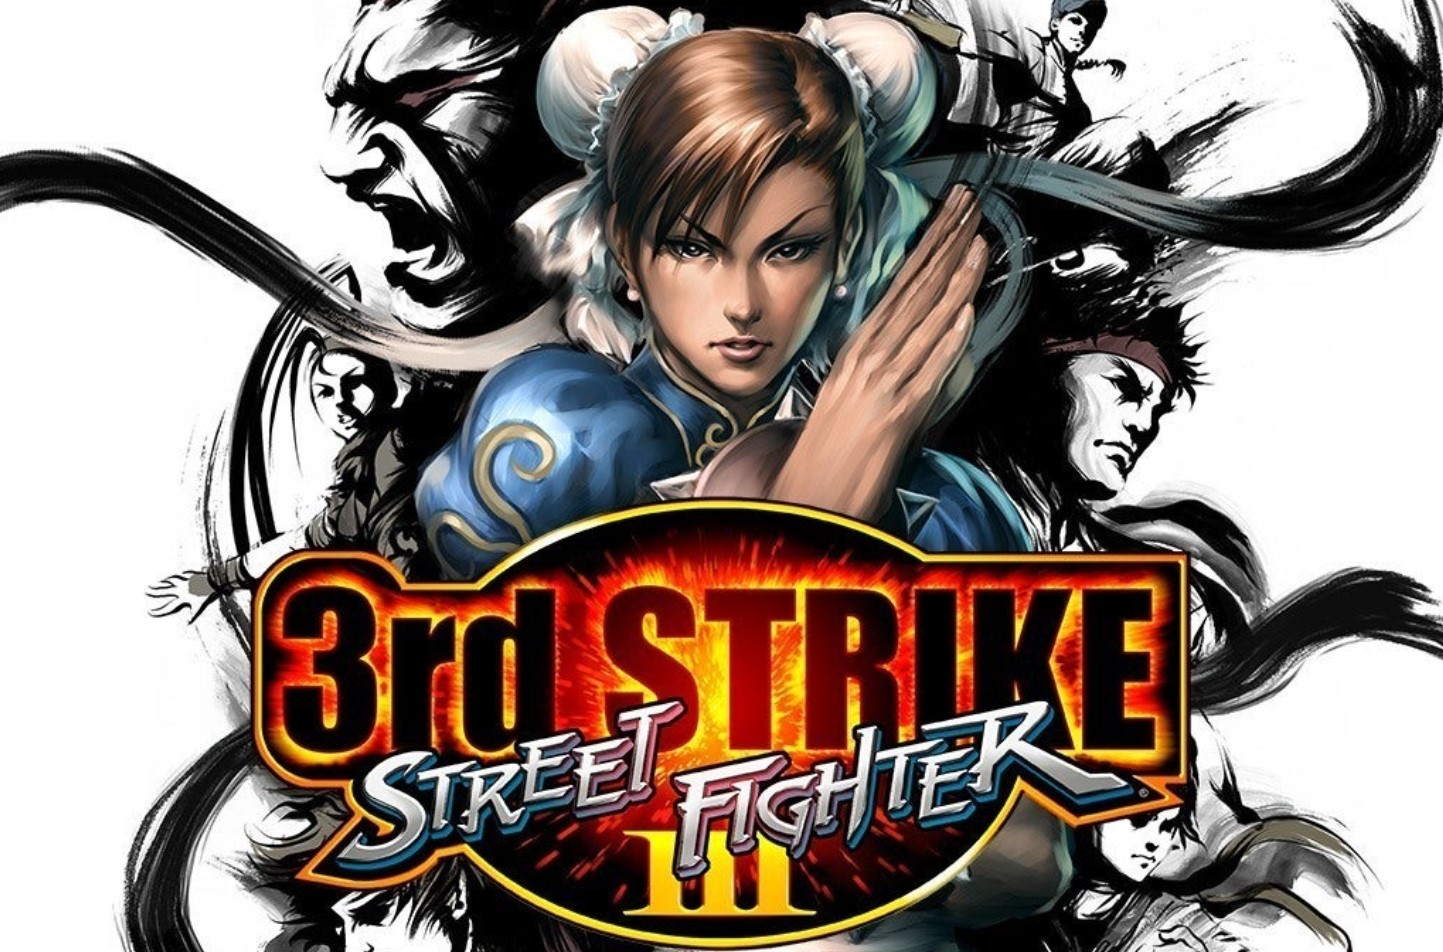 The 10 best Street Fighter games ranked: From Street Fighter EX to 3rd  Strike - Dexerto